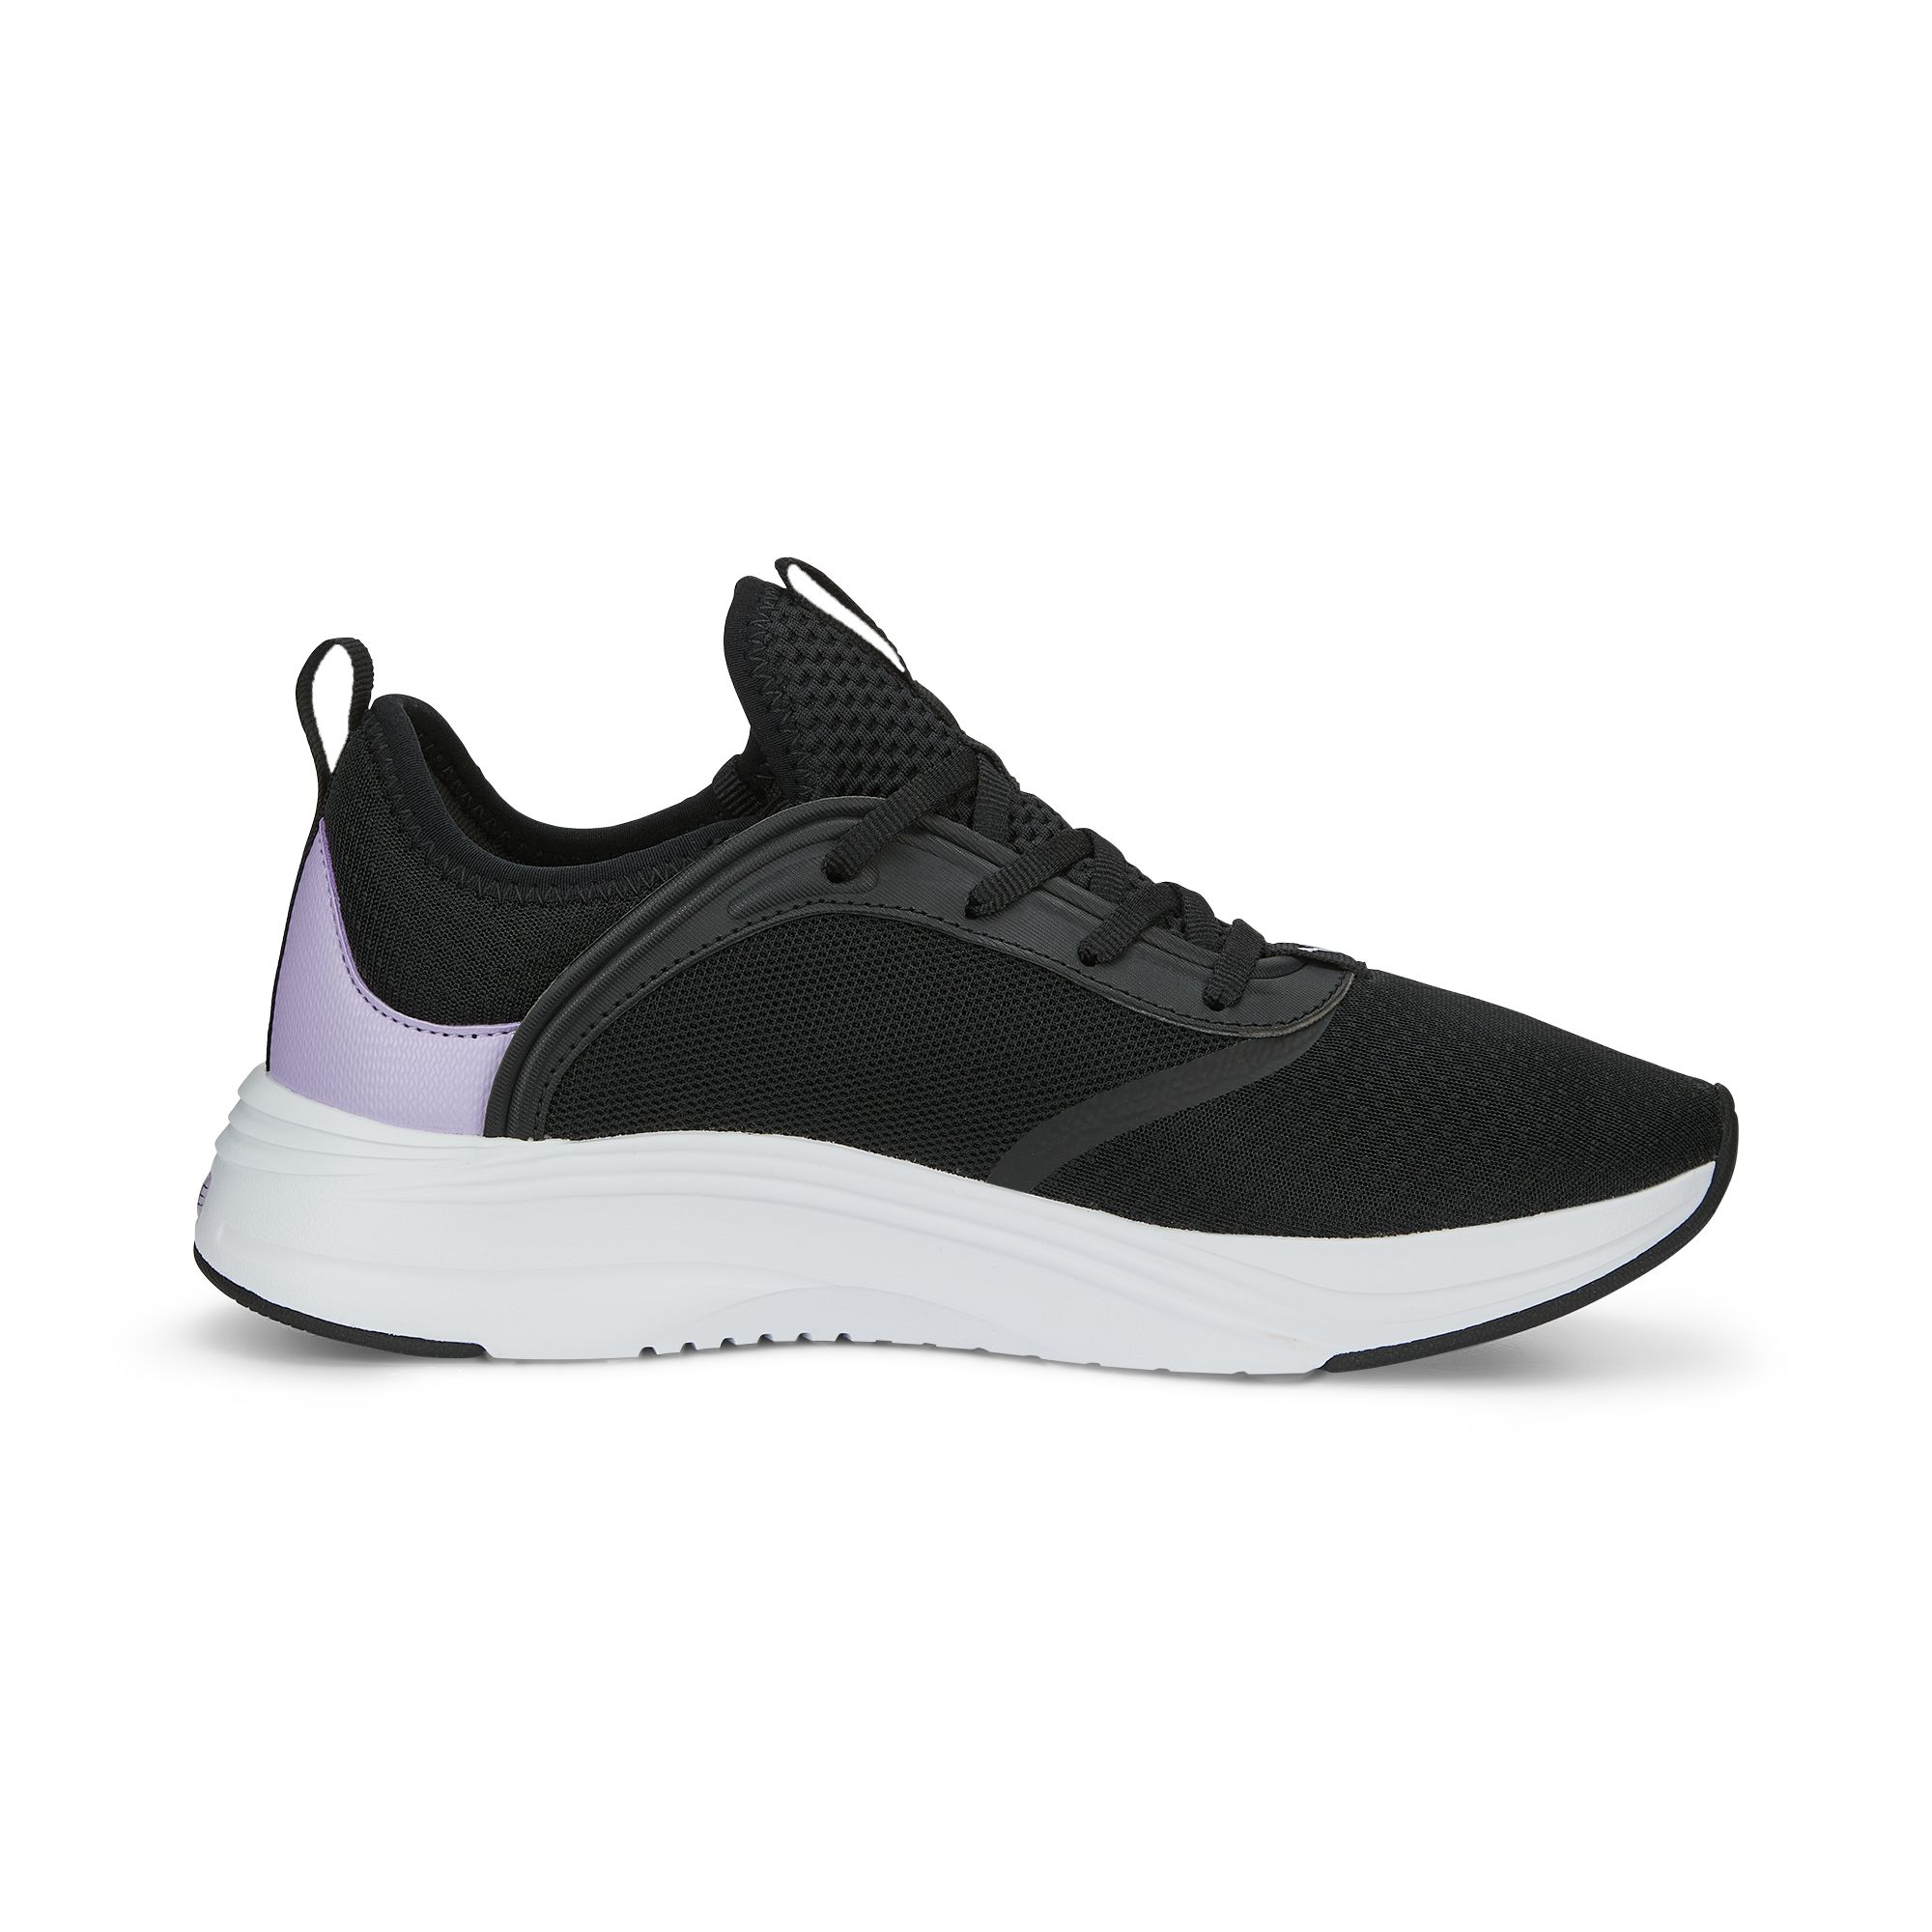 Image of Puma Women's Softride Ruby Shoes